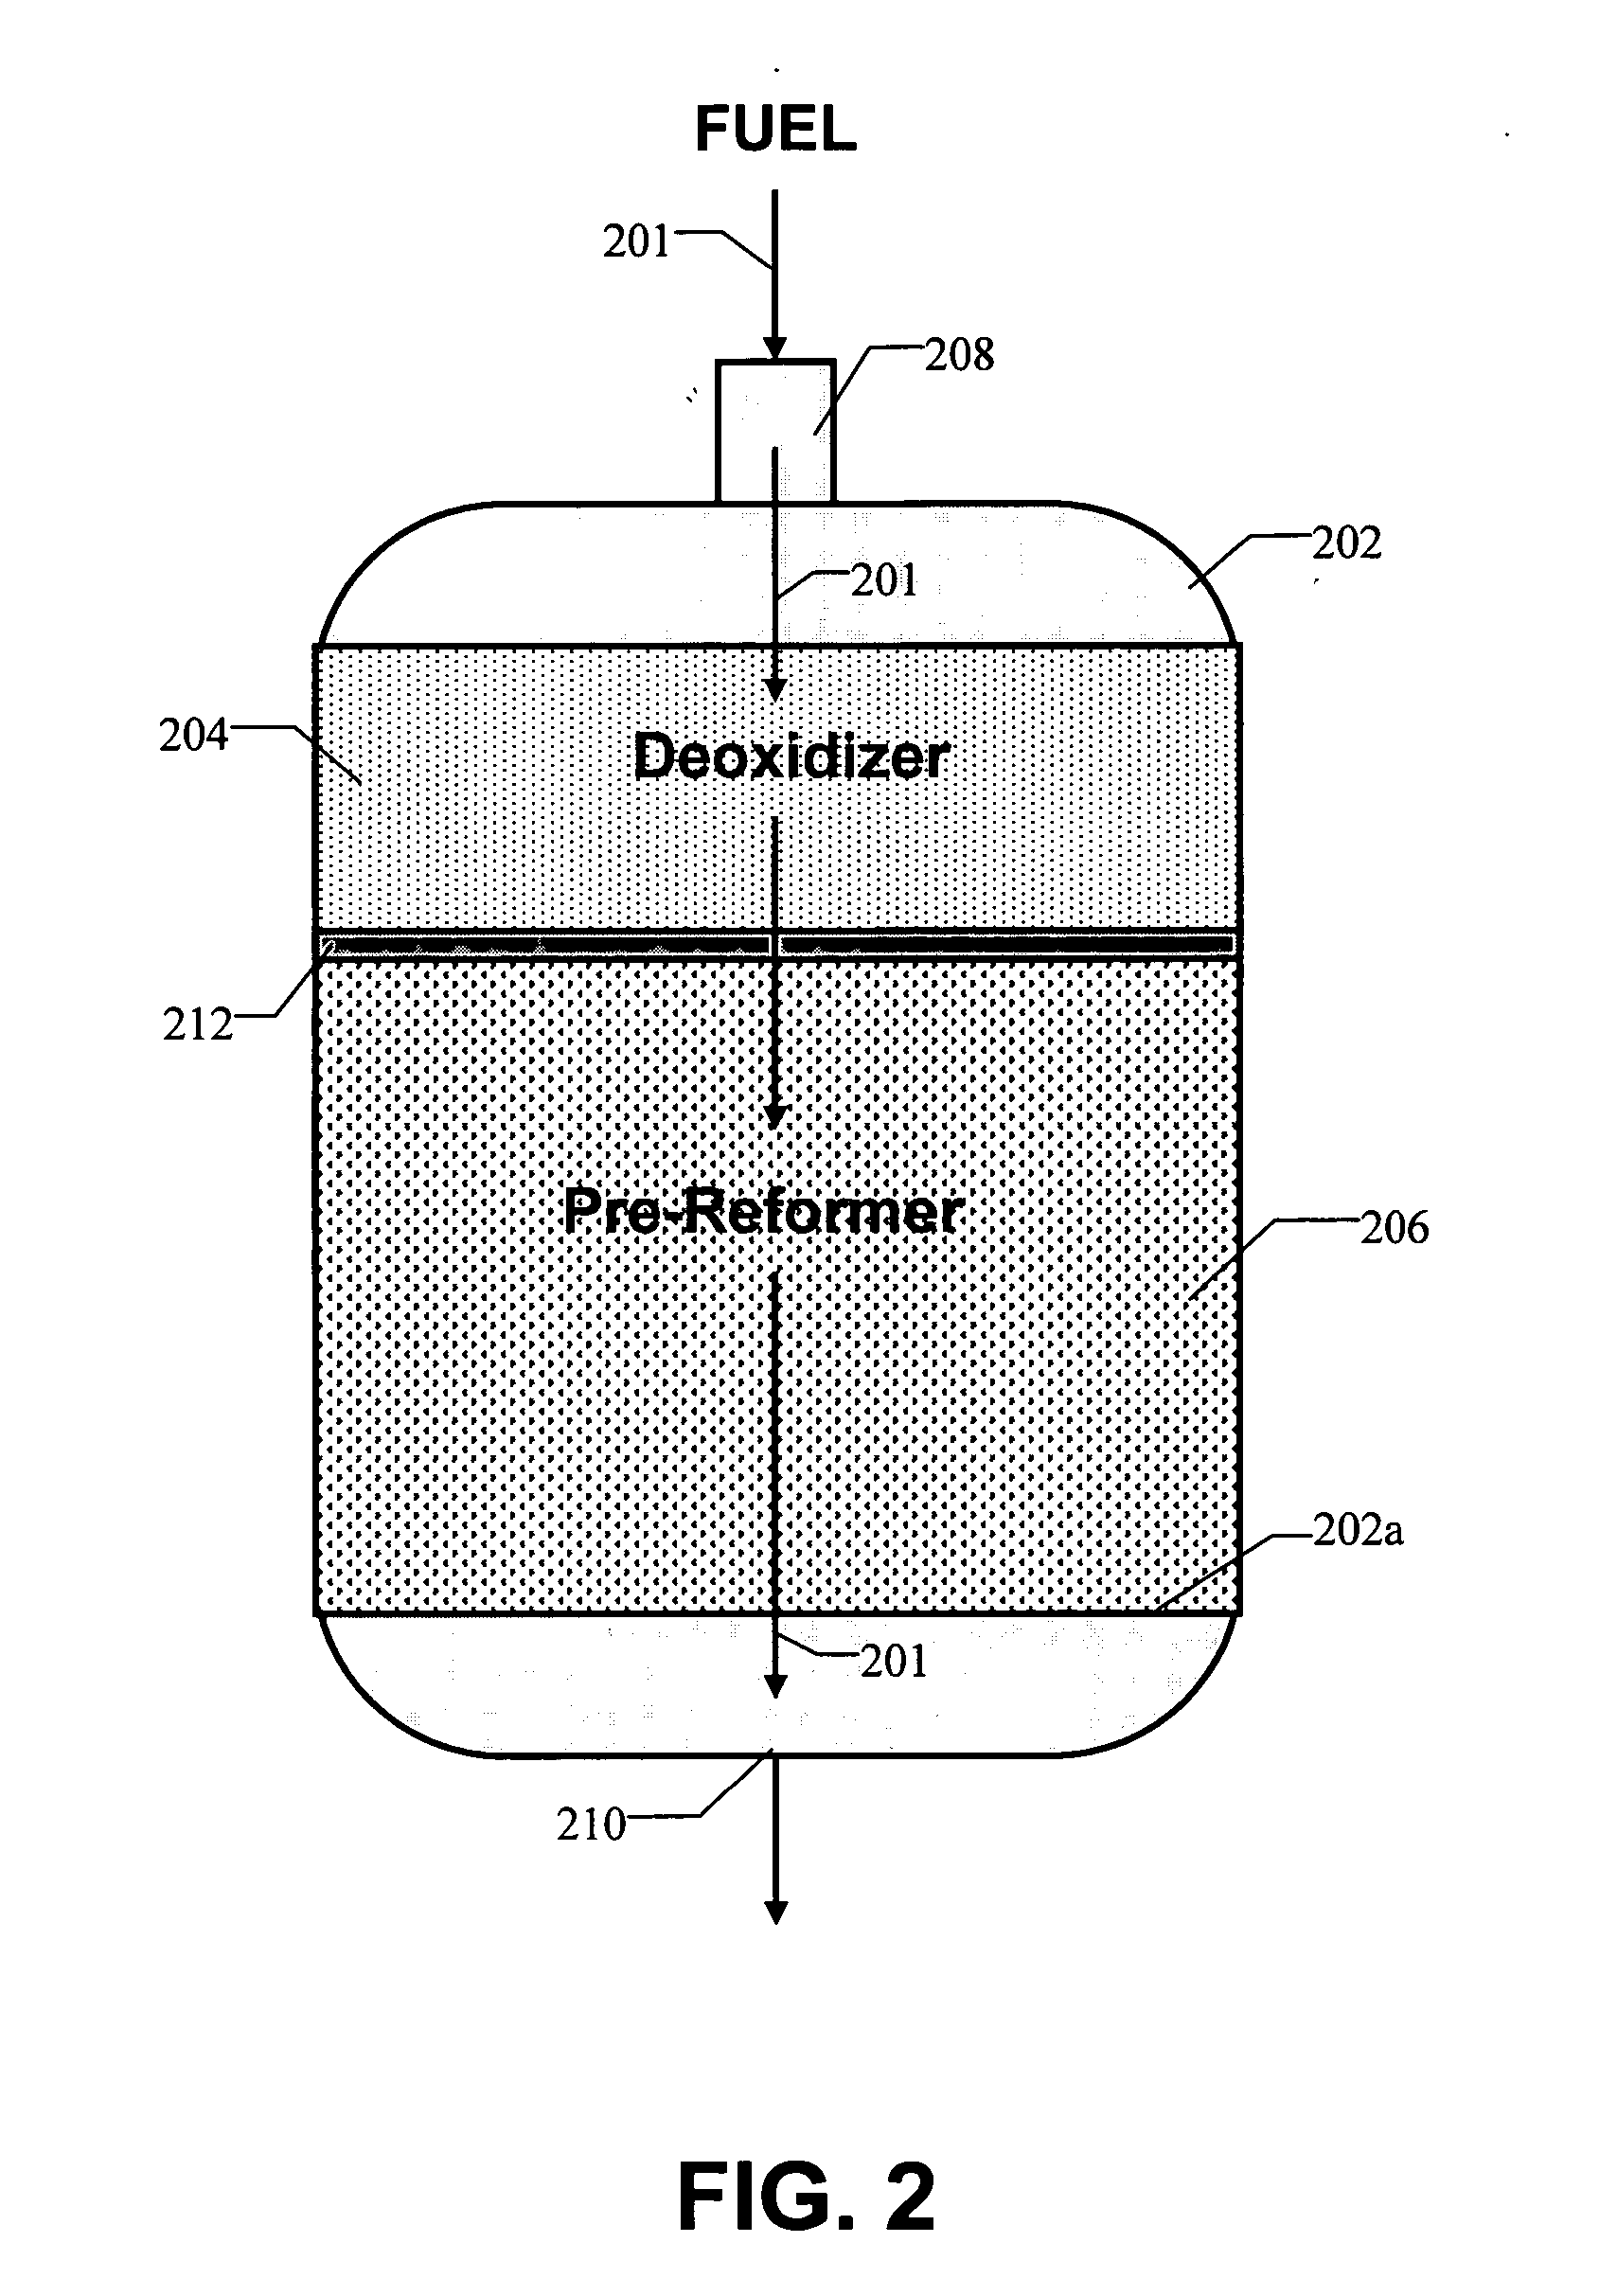 Pre-processing assembly for pre-processing fuel feedstocks for use in a fuel cell system